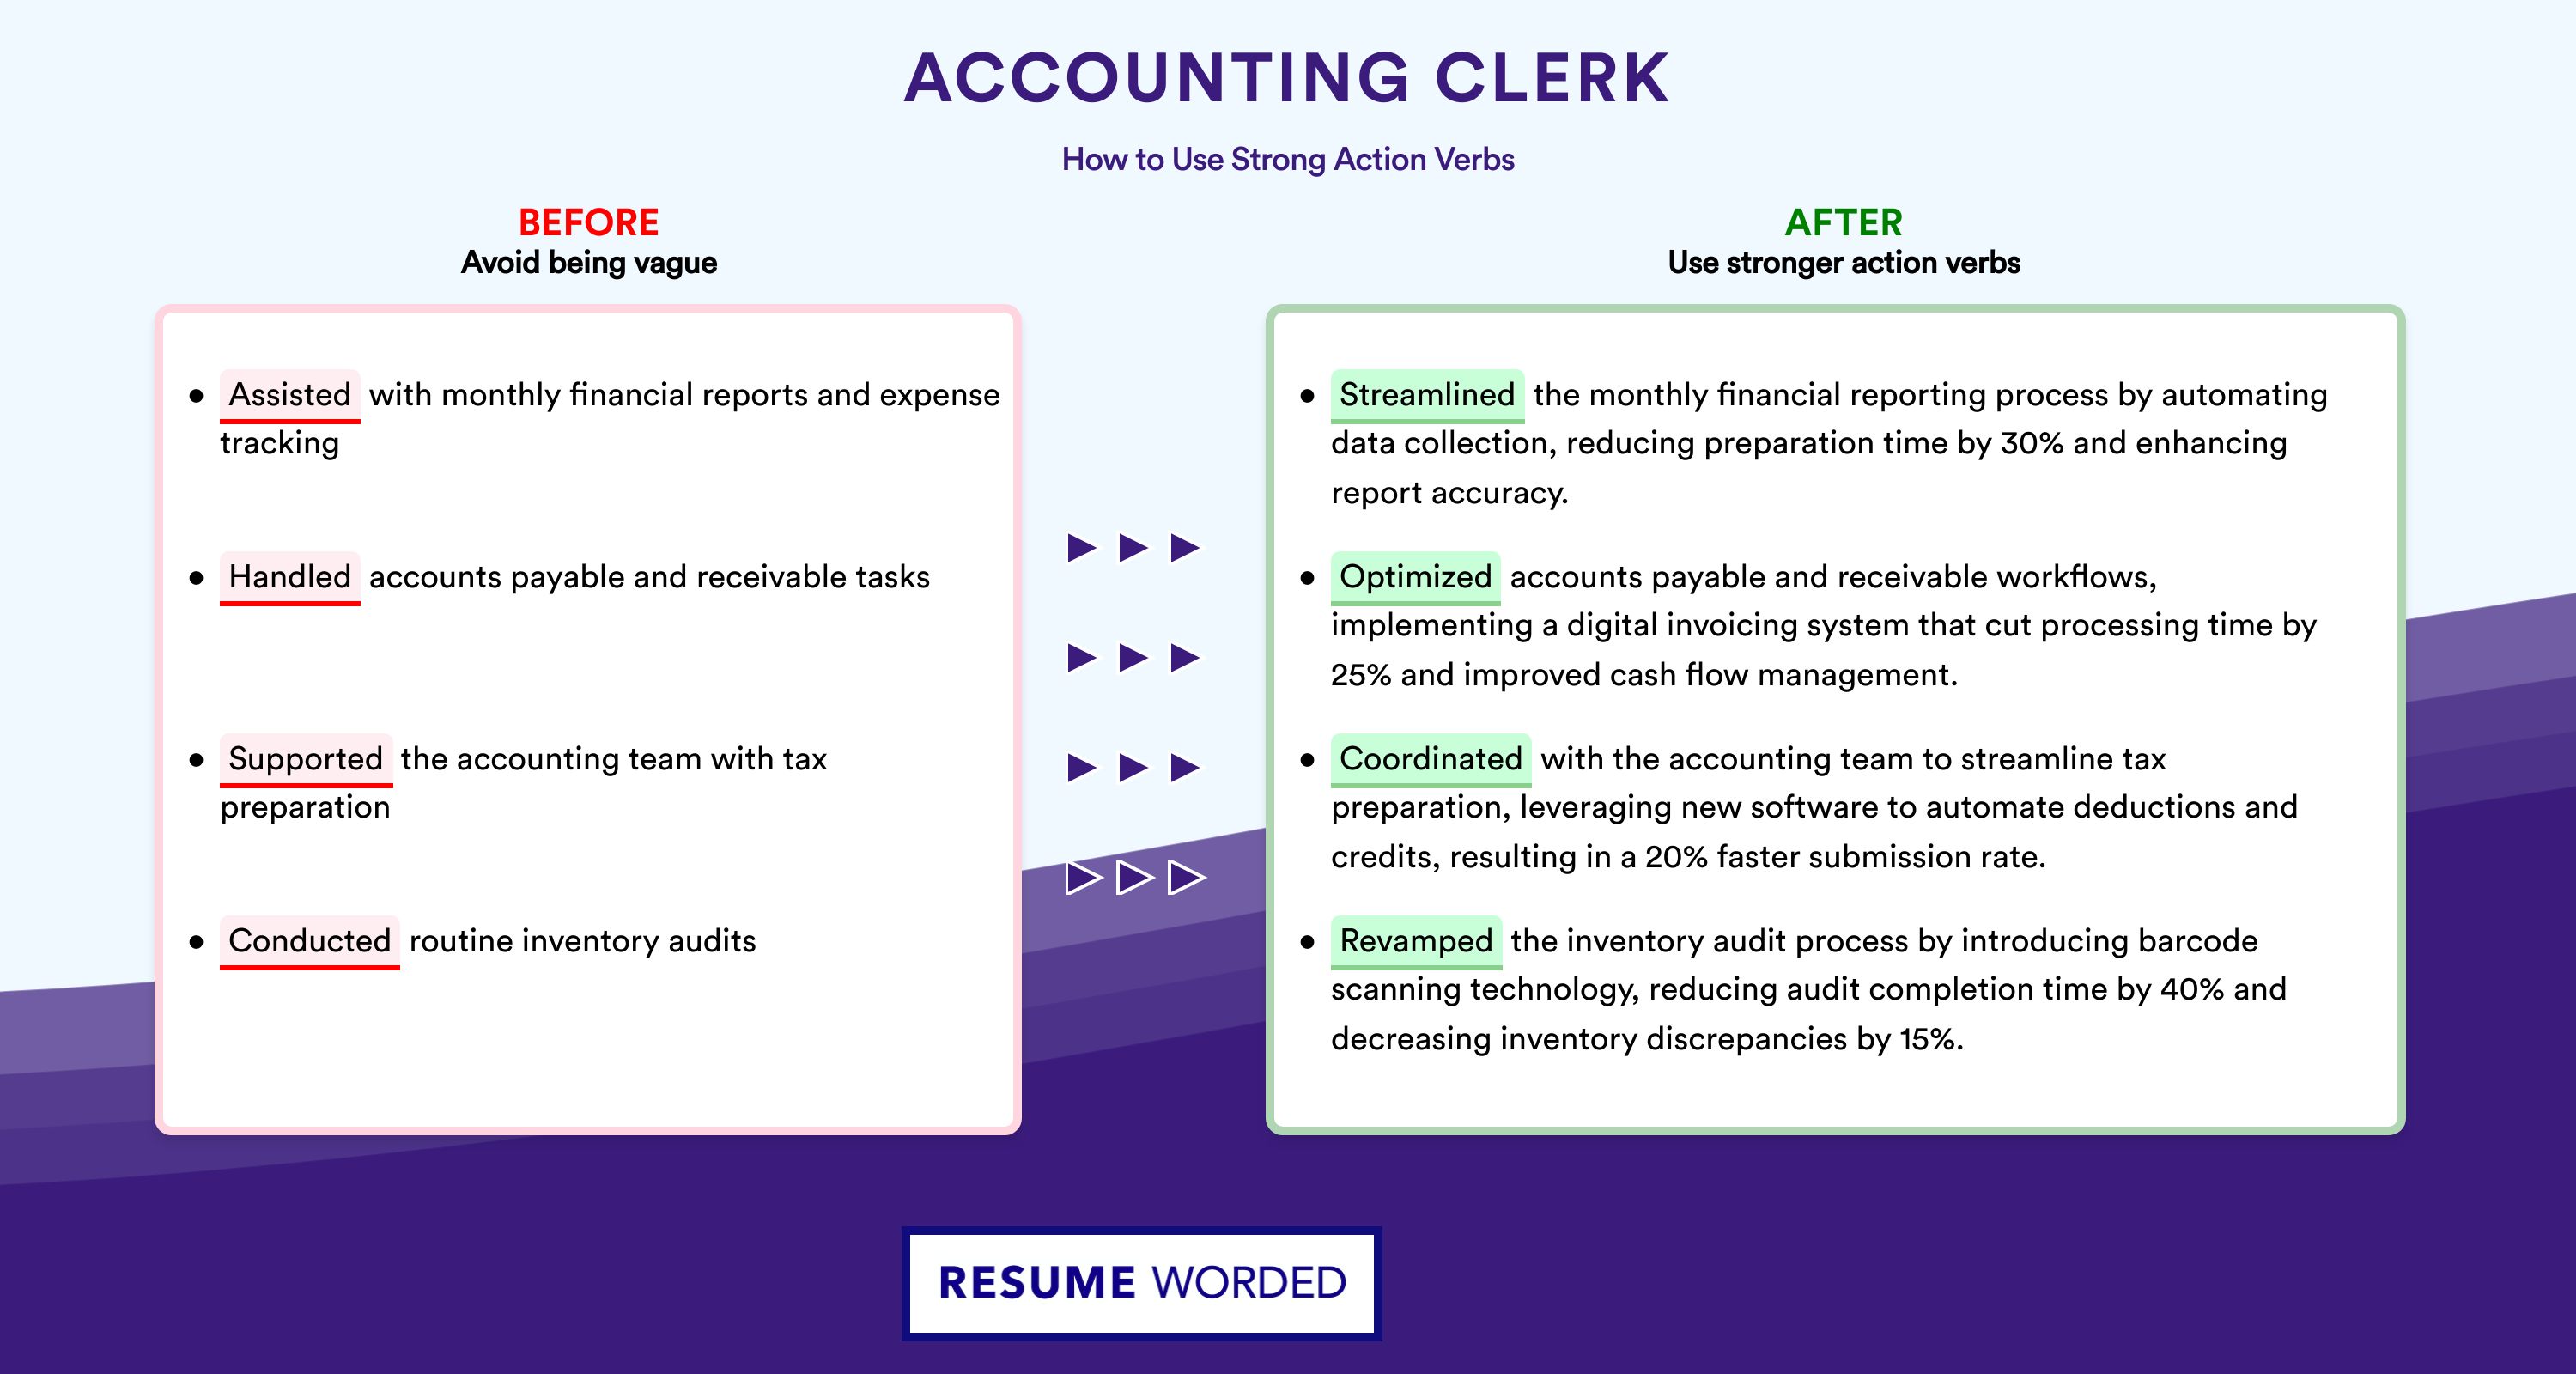 Action Verbs for Accounting Clerk